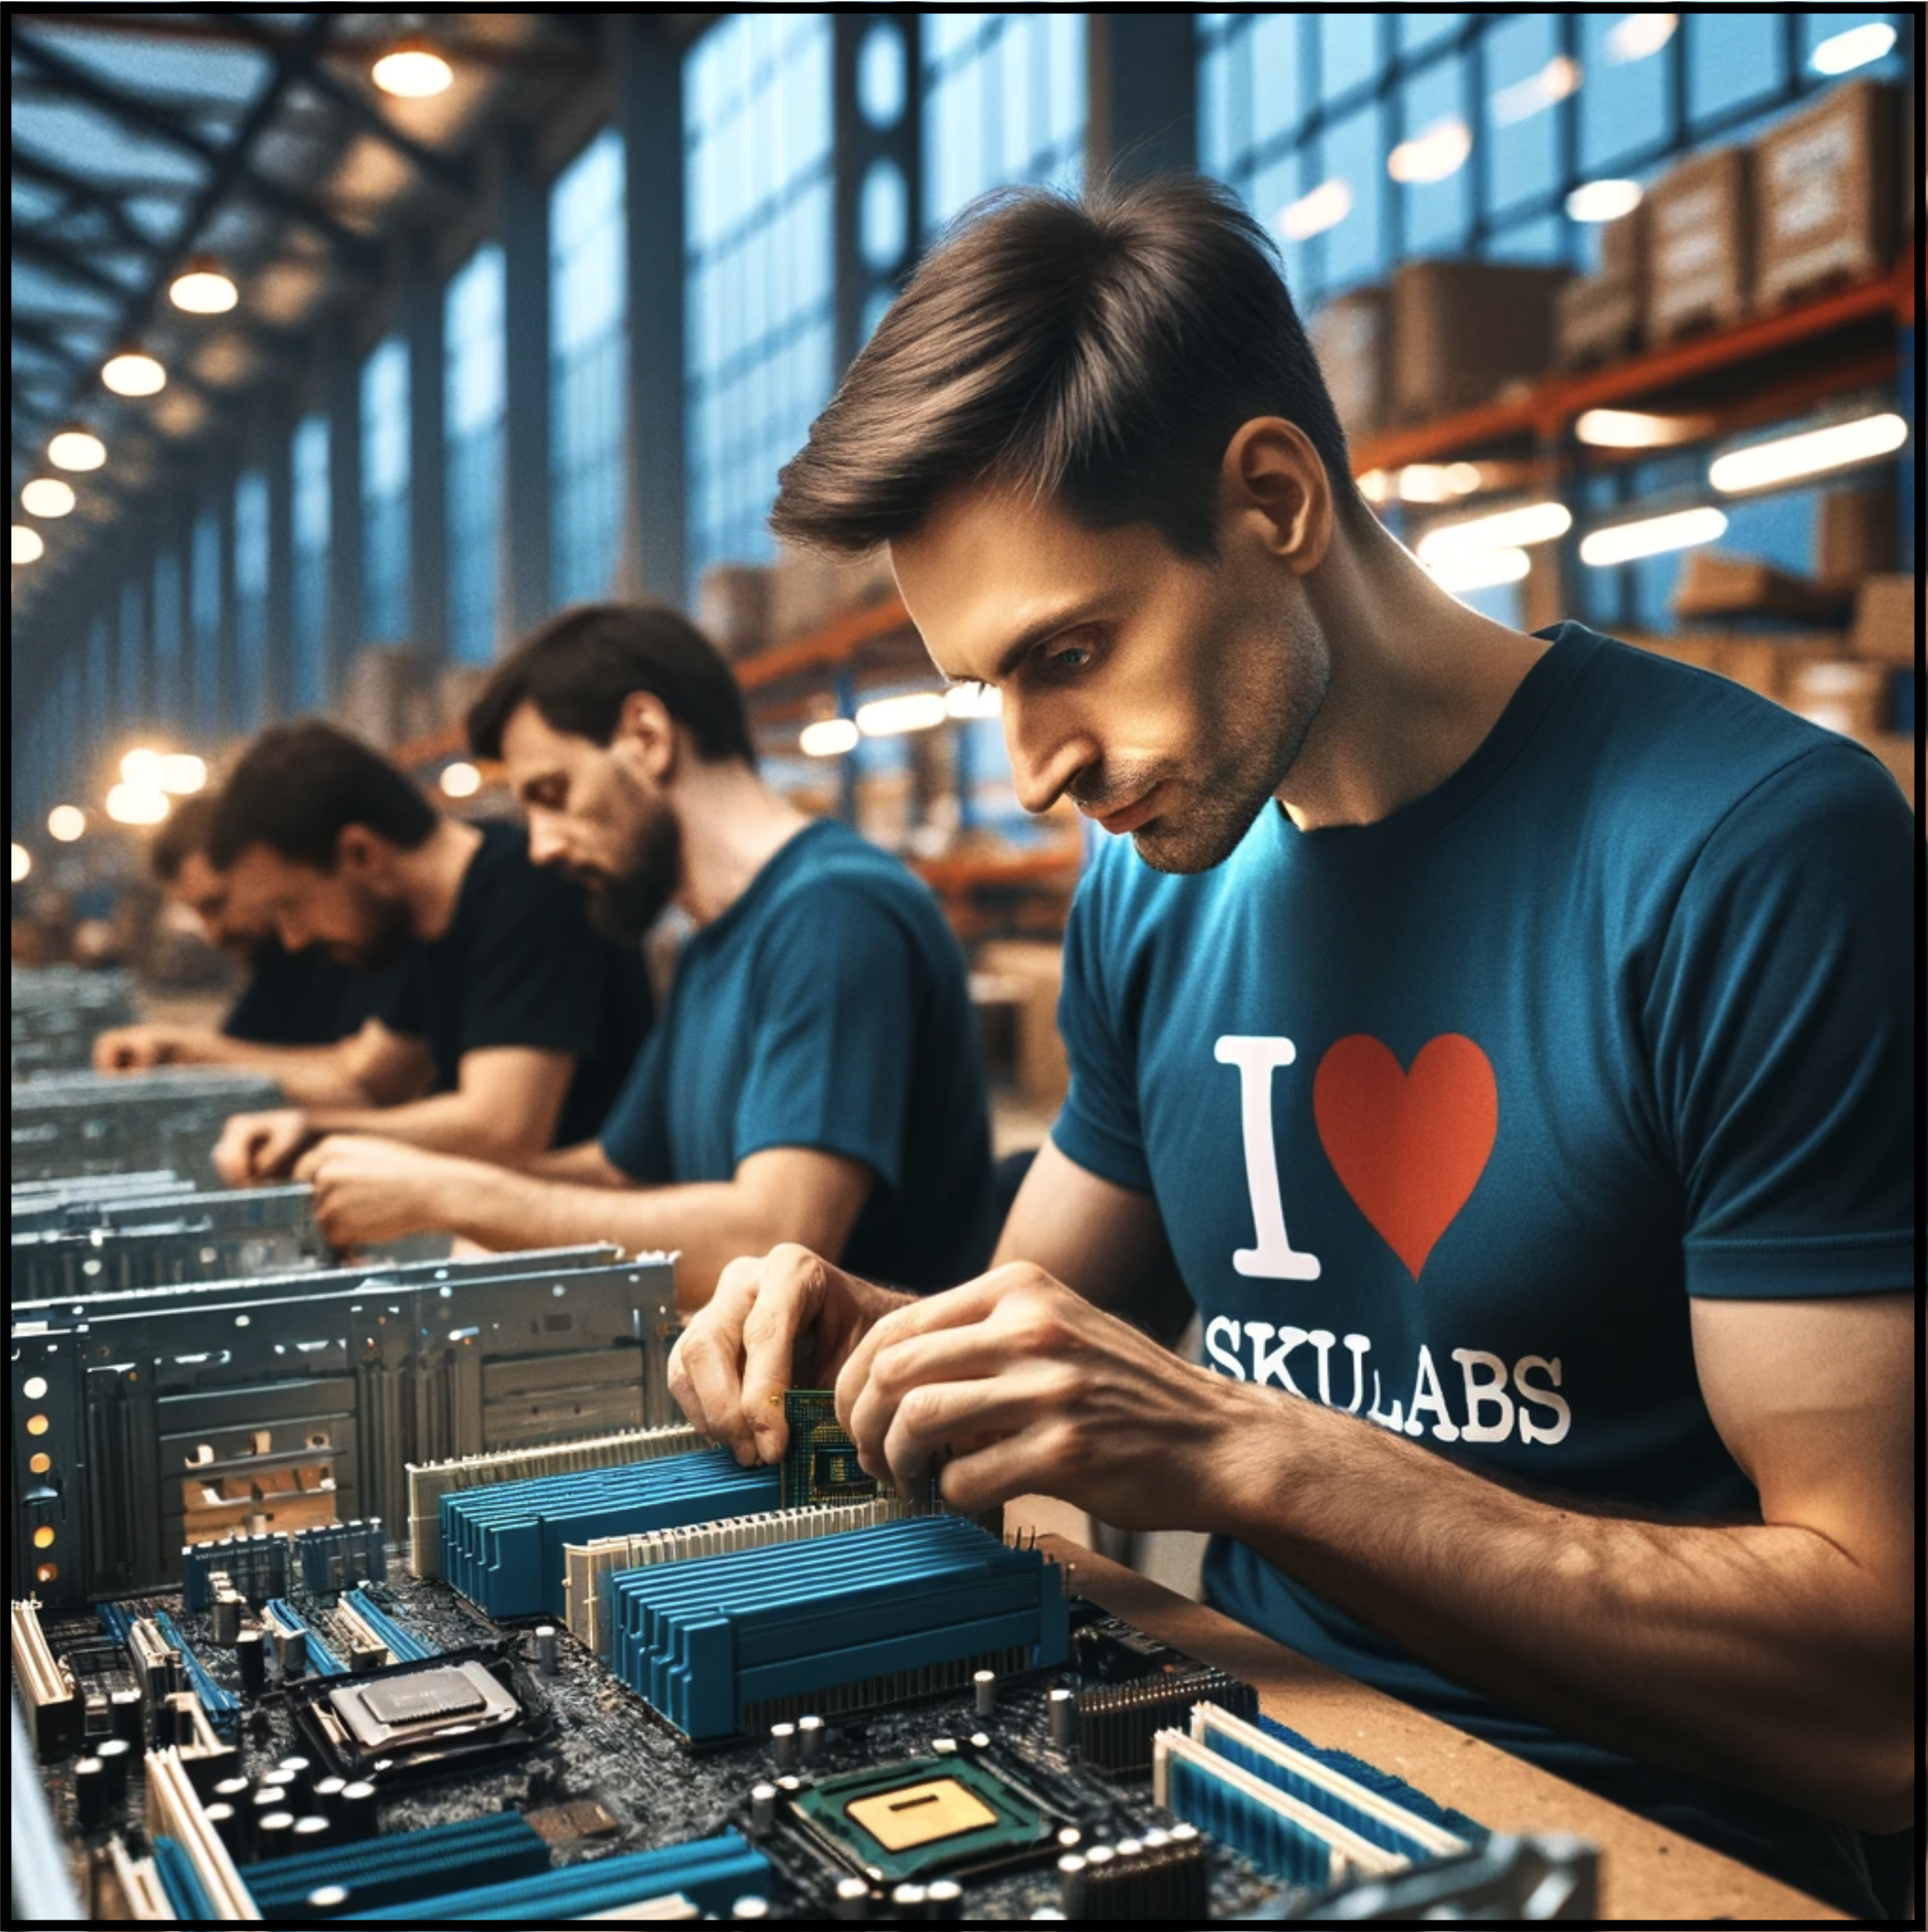 Workers assembling products to be sold on eCommerce